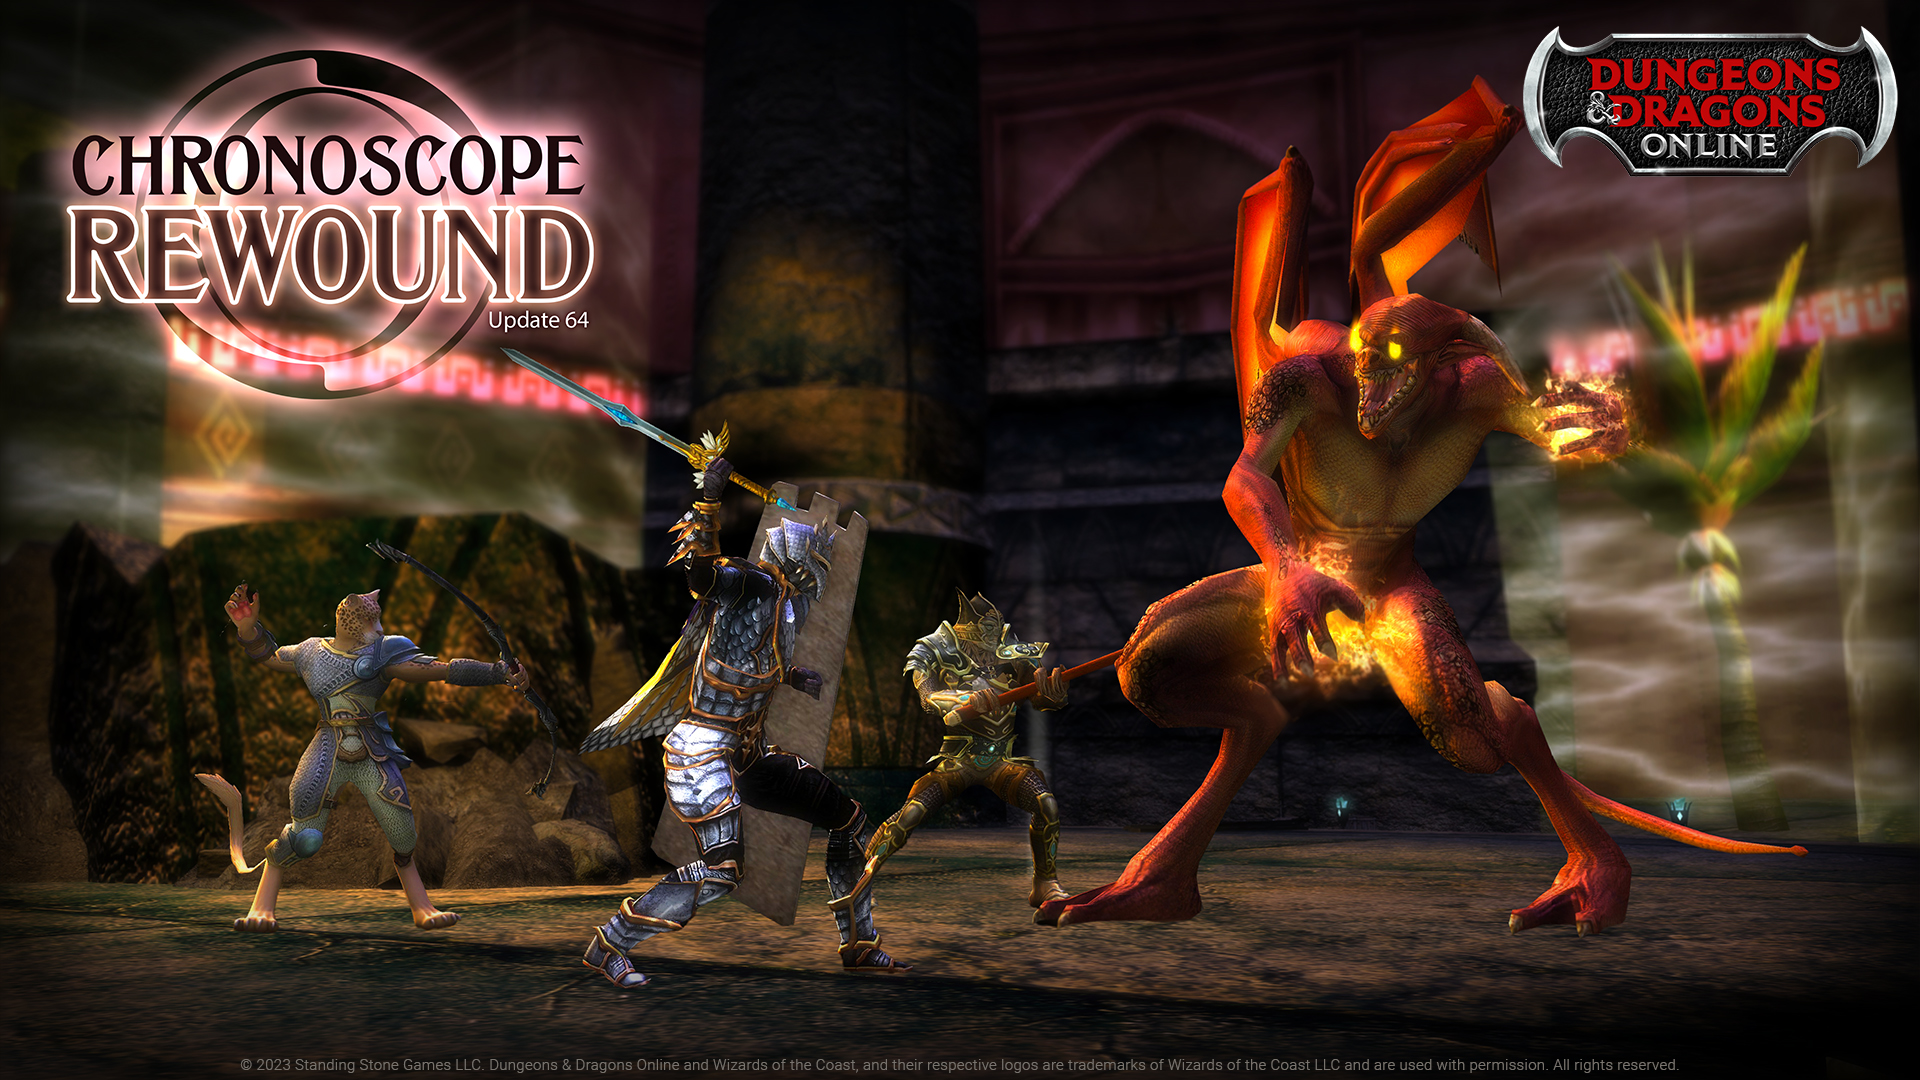 Home  Dungeons & Dragons Online